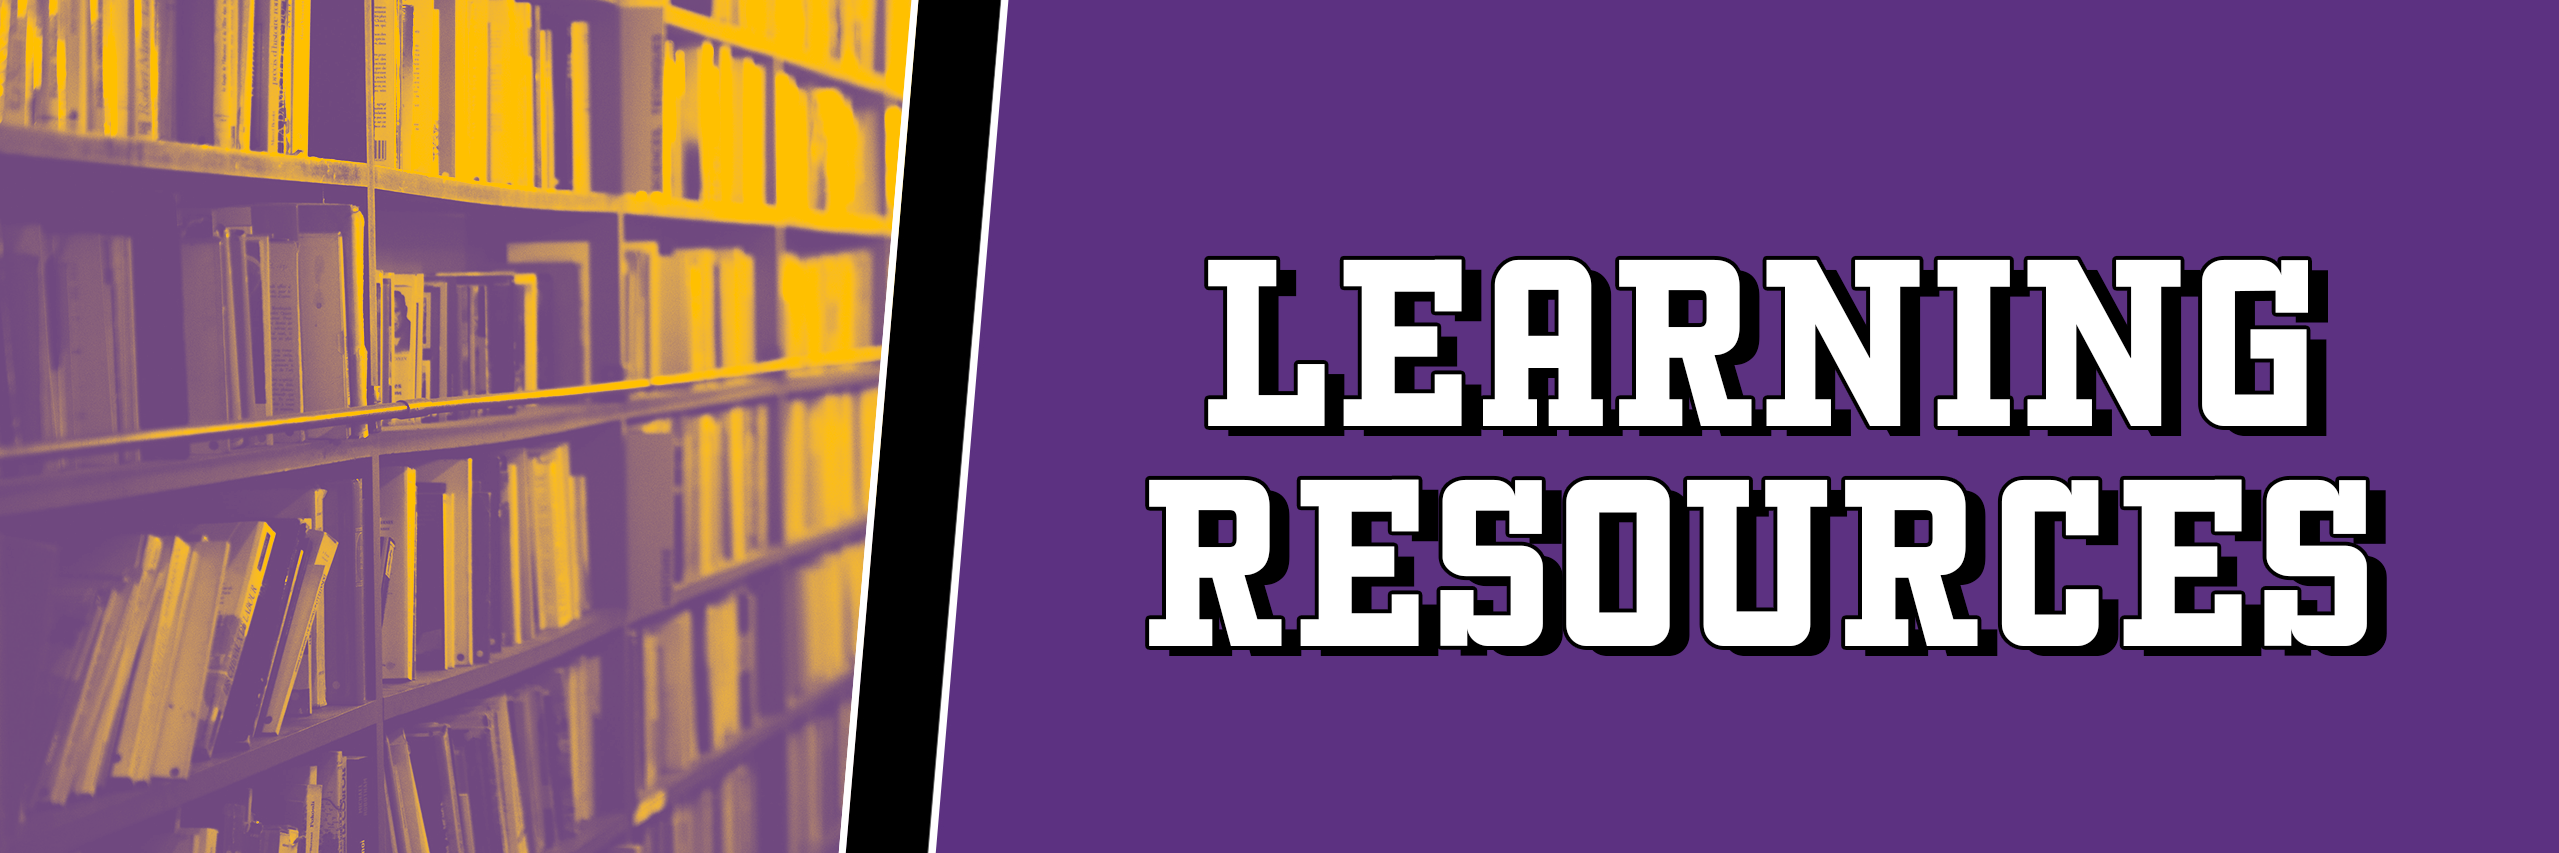 learning resources banner